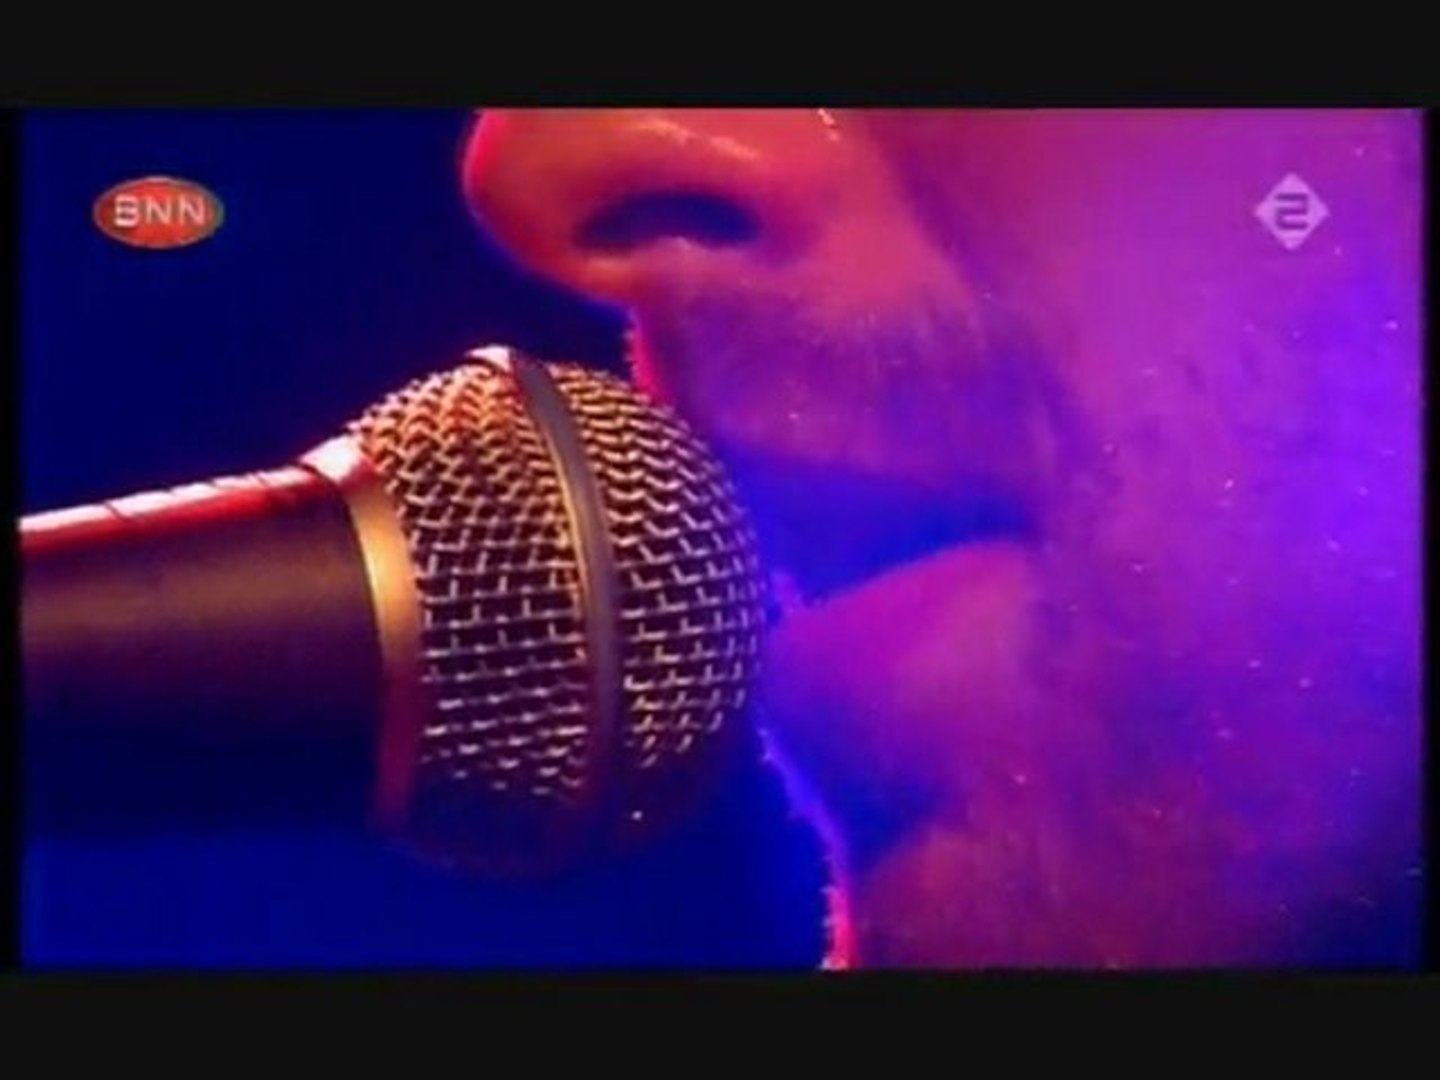 Coldplay - 09 The scientist Live in Amsterdam 2005 video Dailymotion